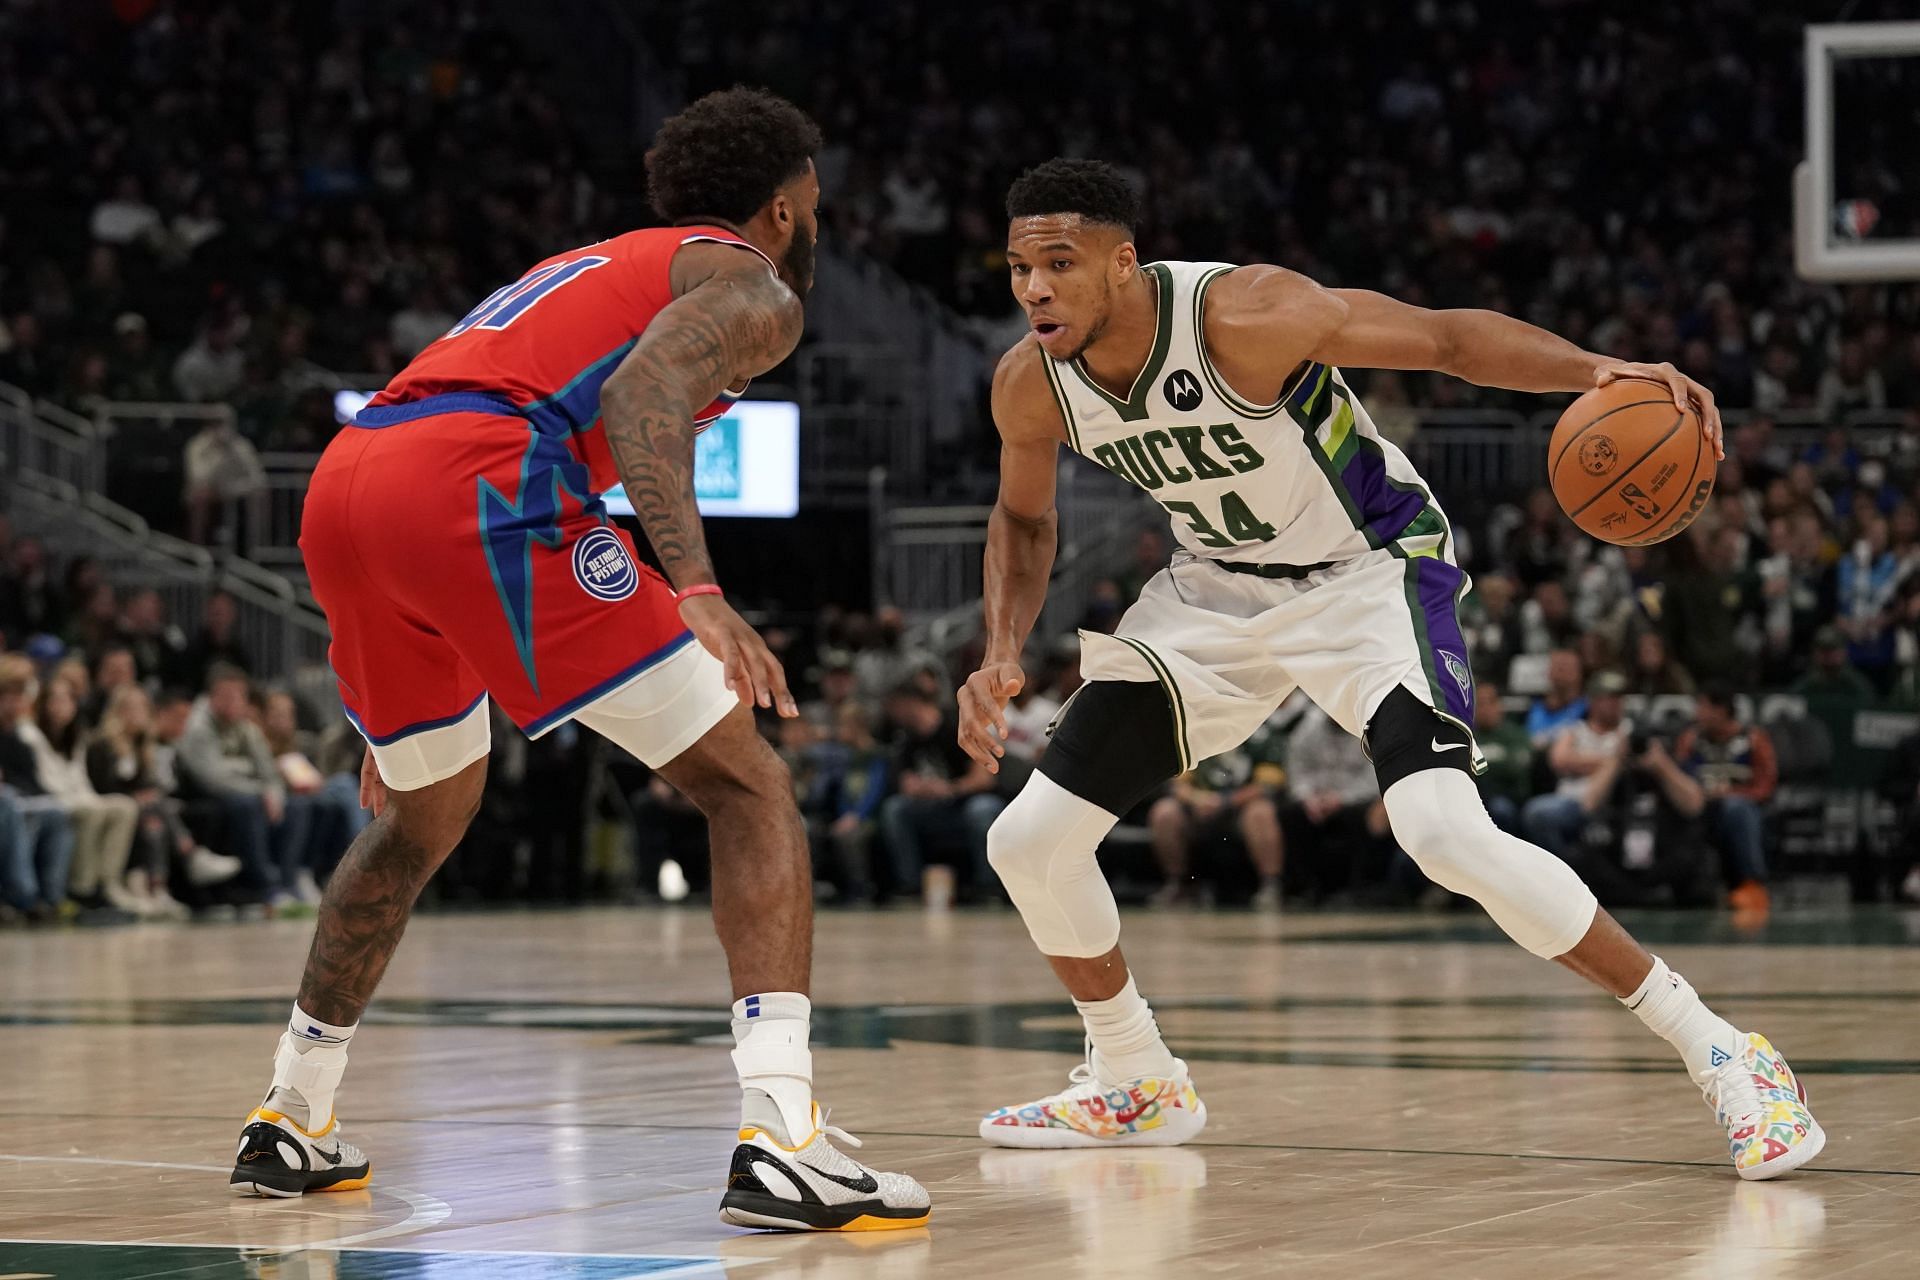 Milwaukee Bucks MVP candidate Giannis Antetokounmpo making a move with the ball